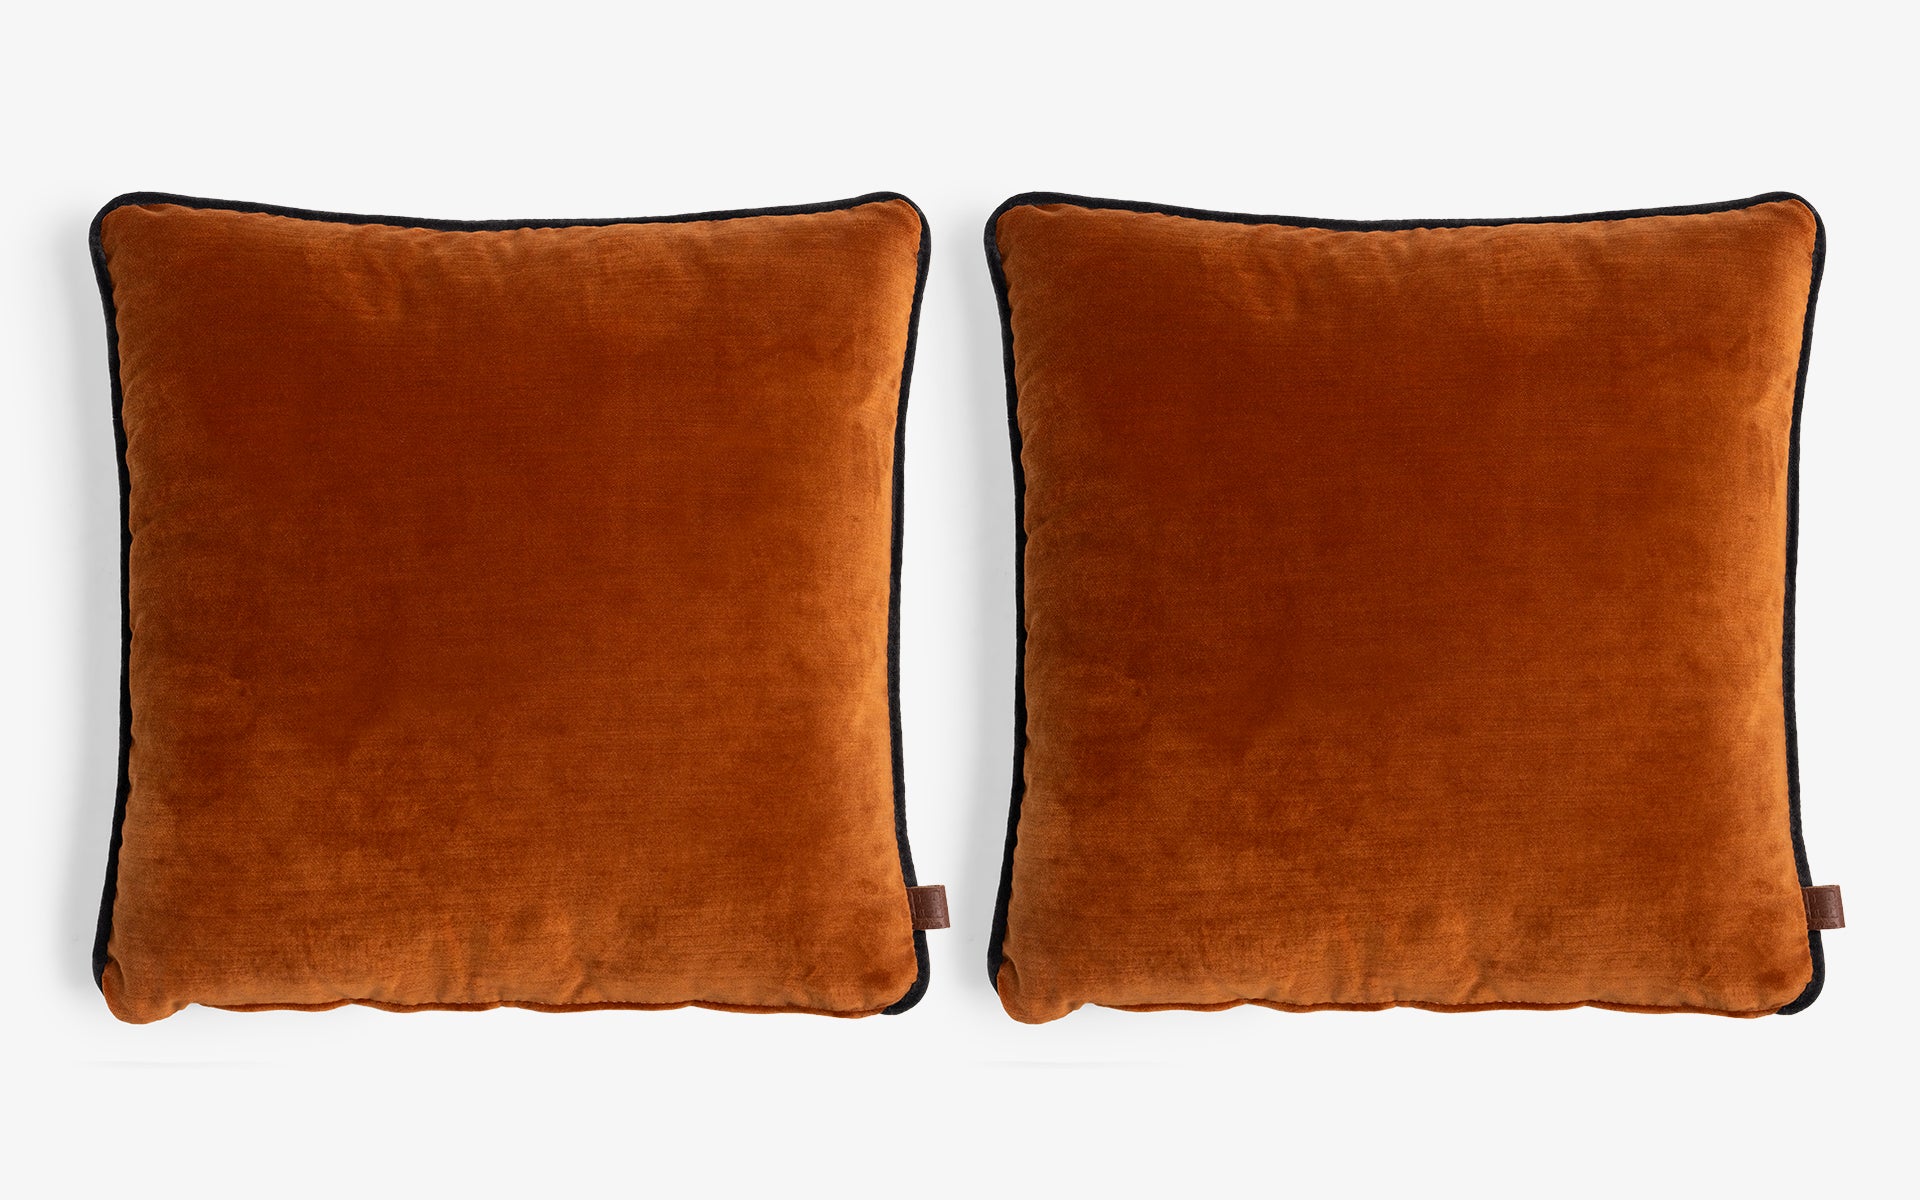 Square Patterned Throw Pillow Set of 2